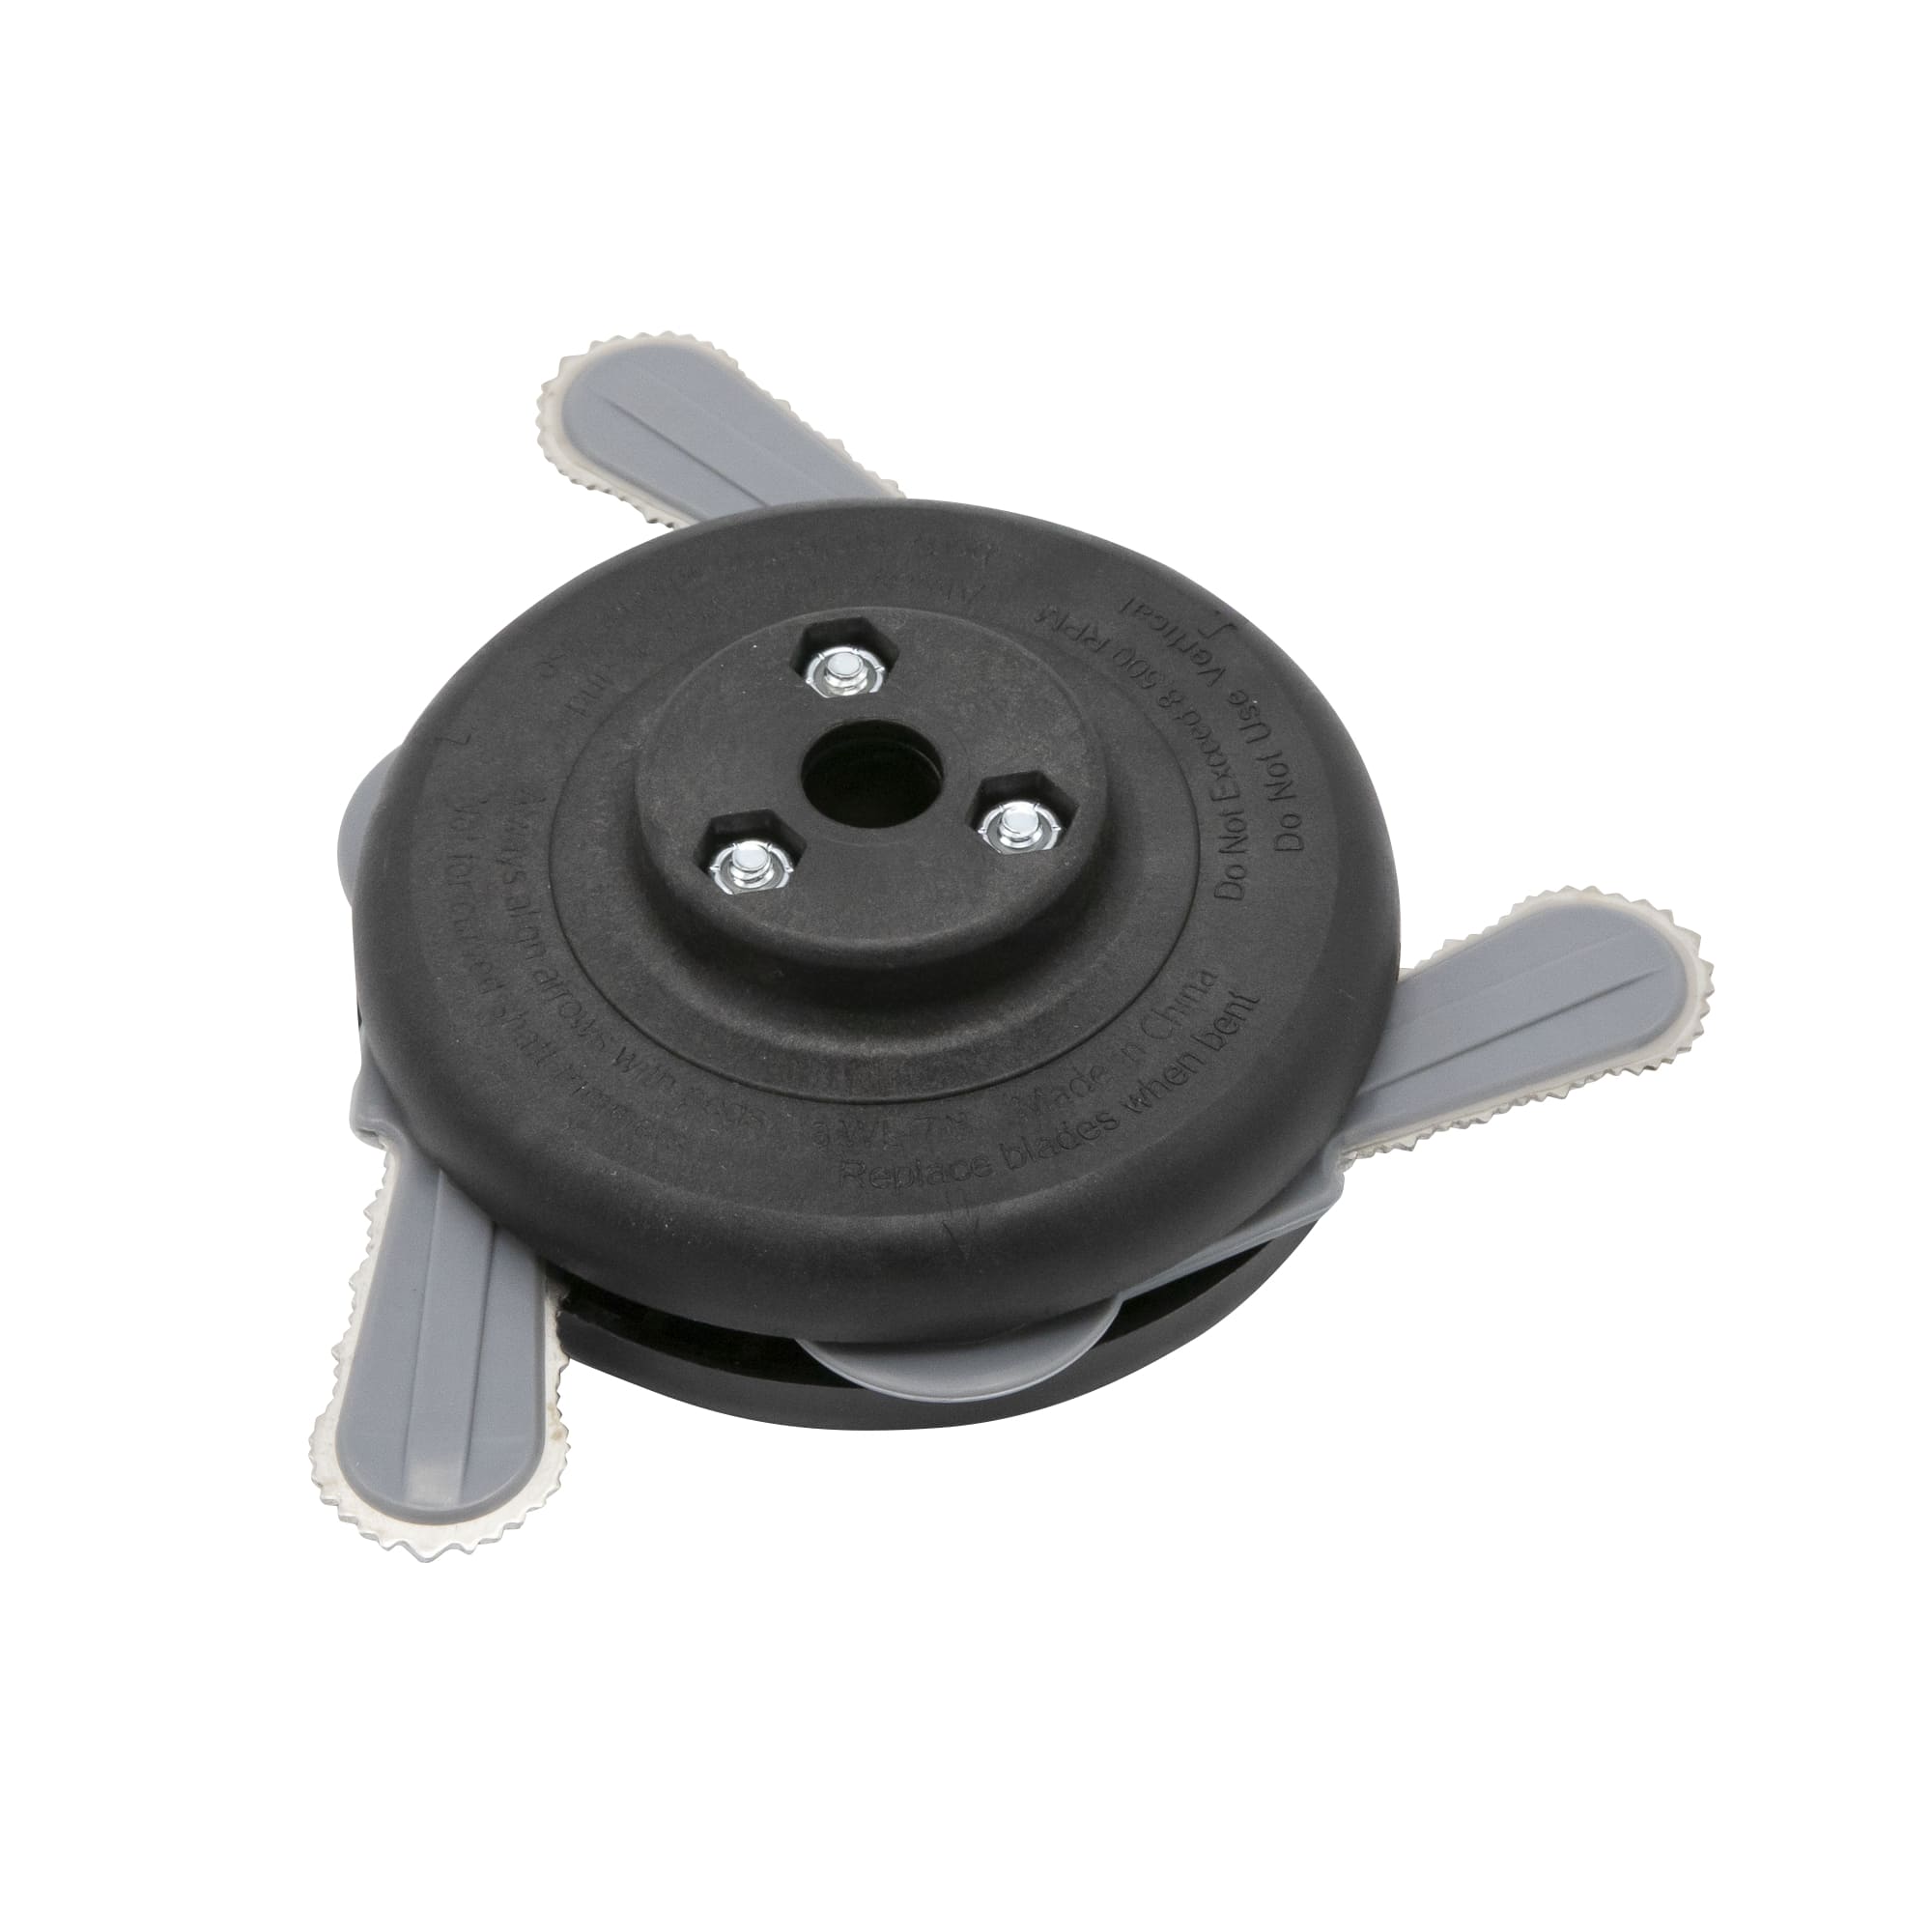 THTEN SF-080 Trimmer Spools cap covers compatible with Black